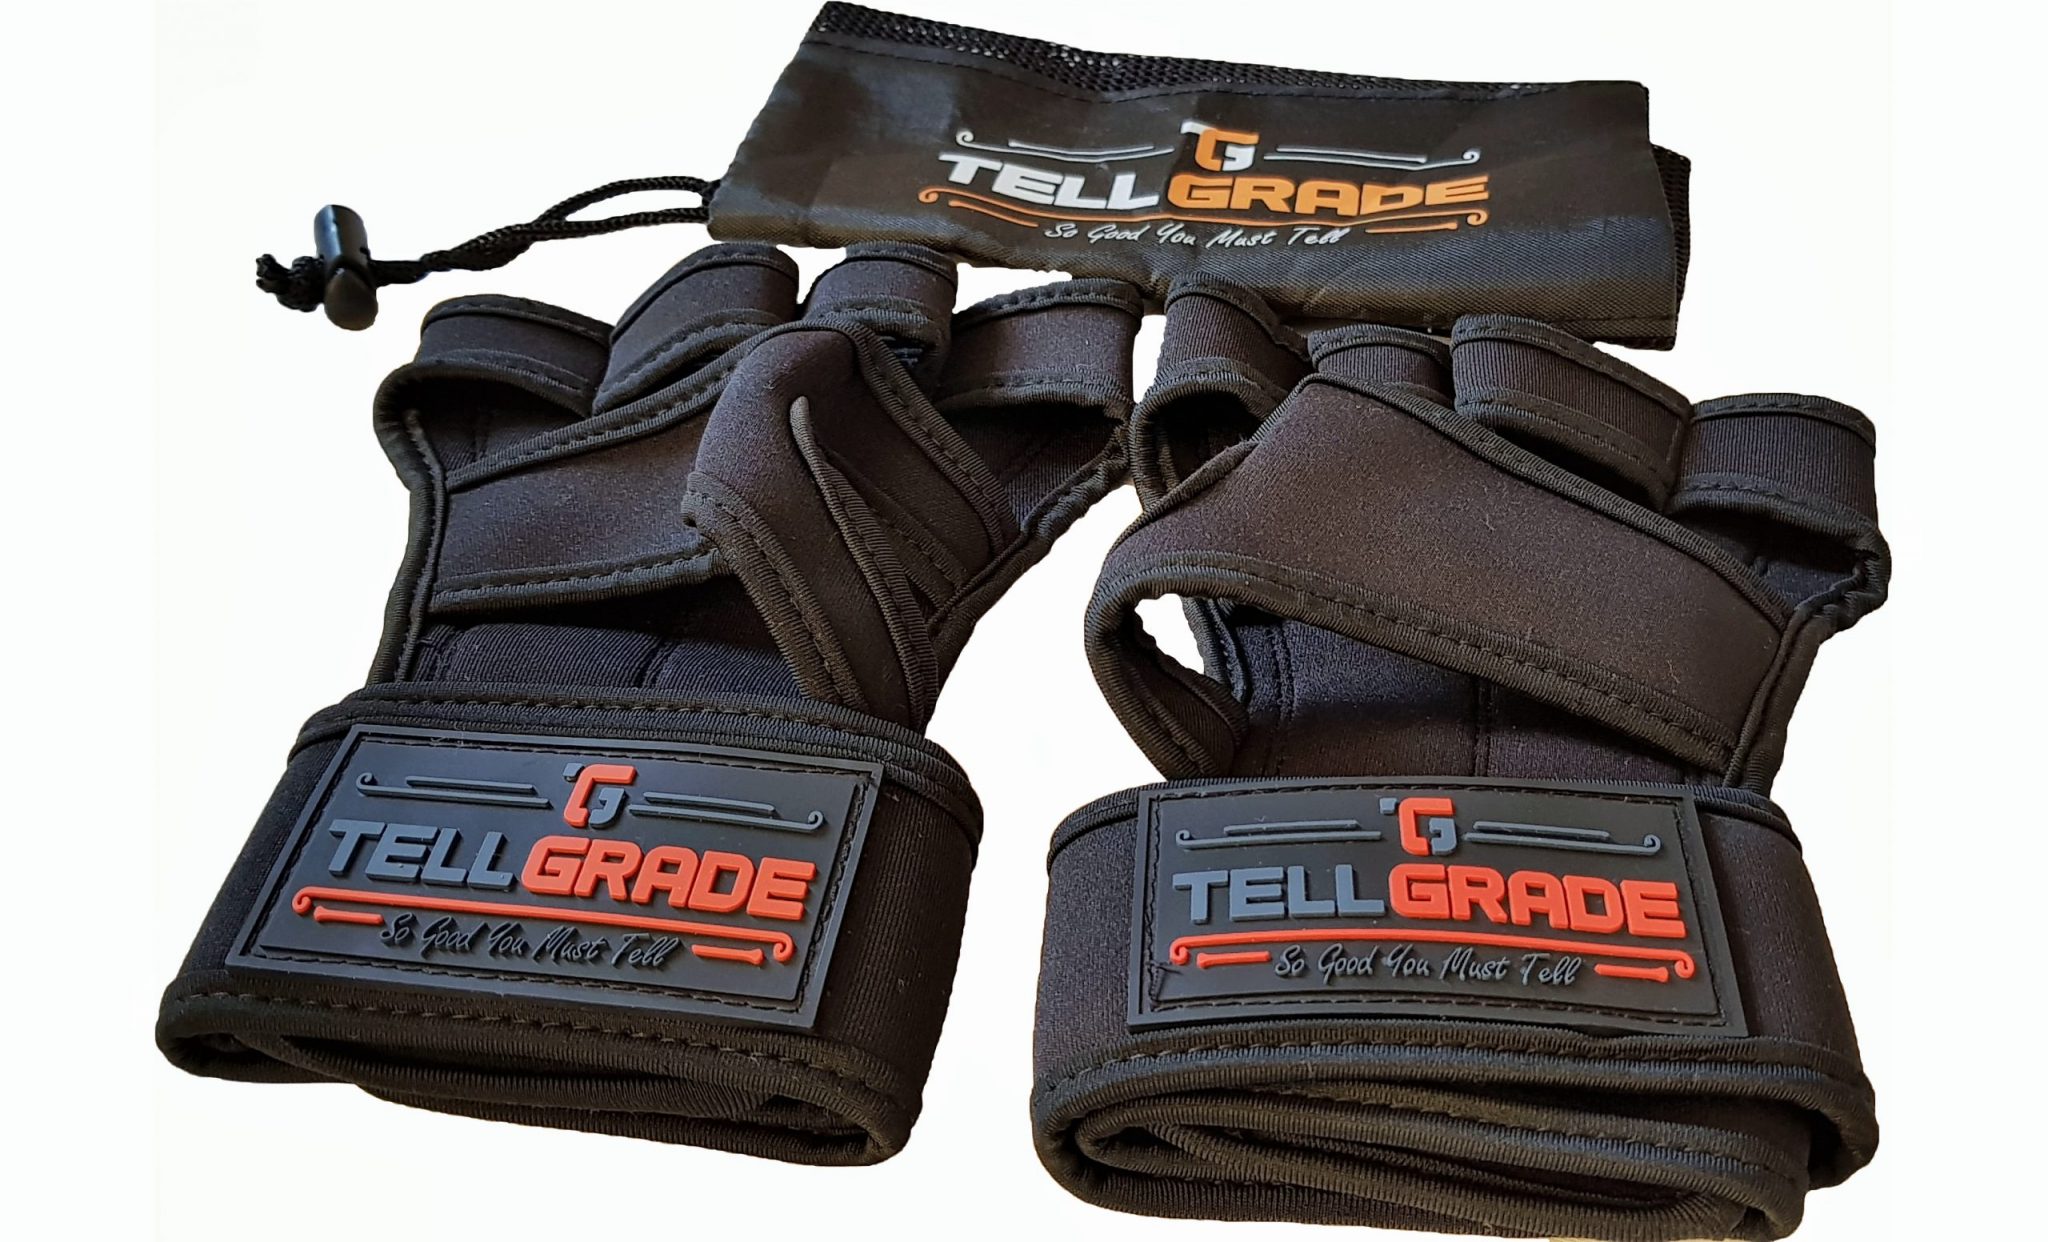 TellGrade Ventilated Fitness Gloves with Wrist Wraps, Full Palm Protection & Extra Grip - Poster 4